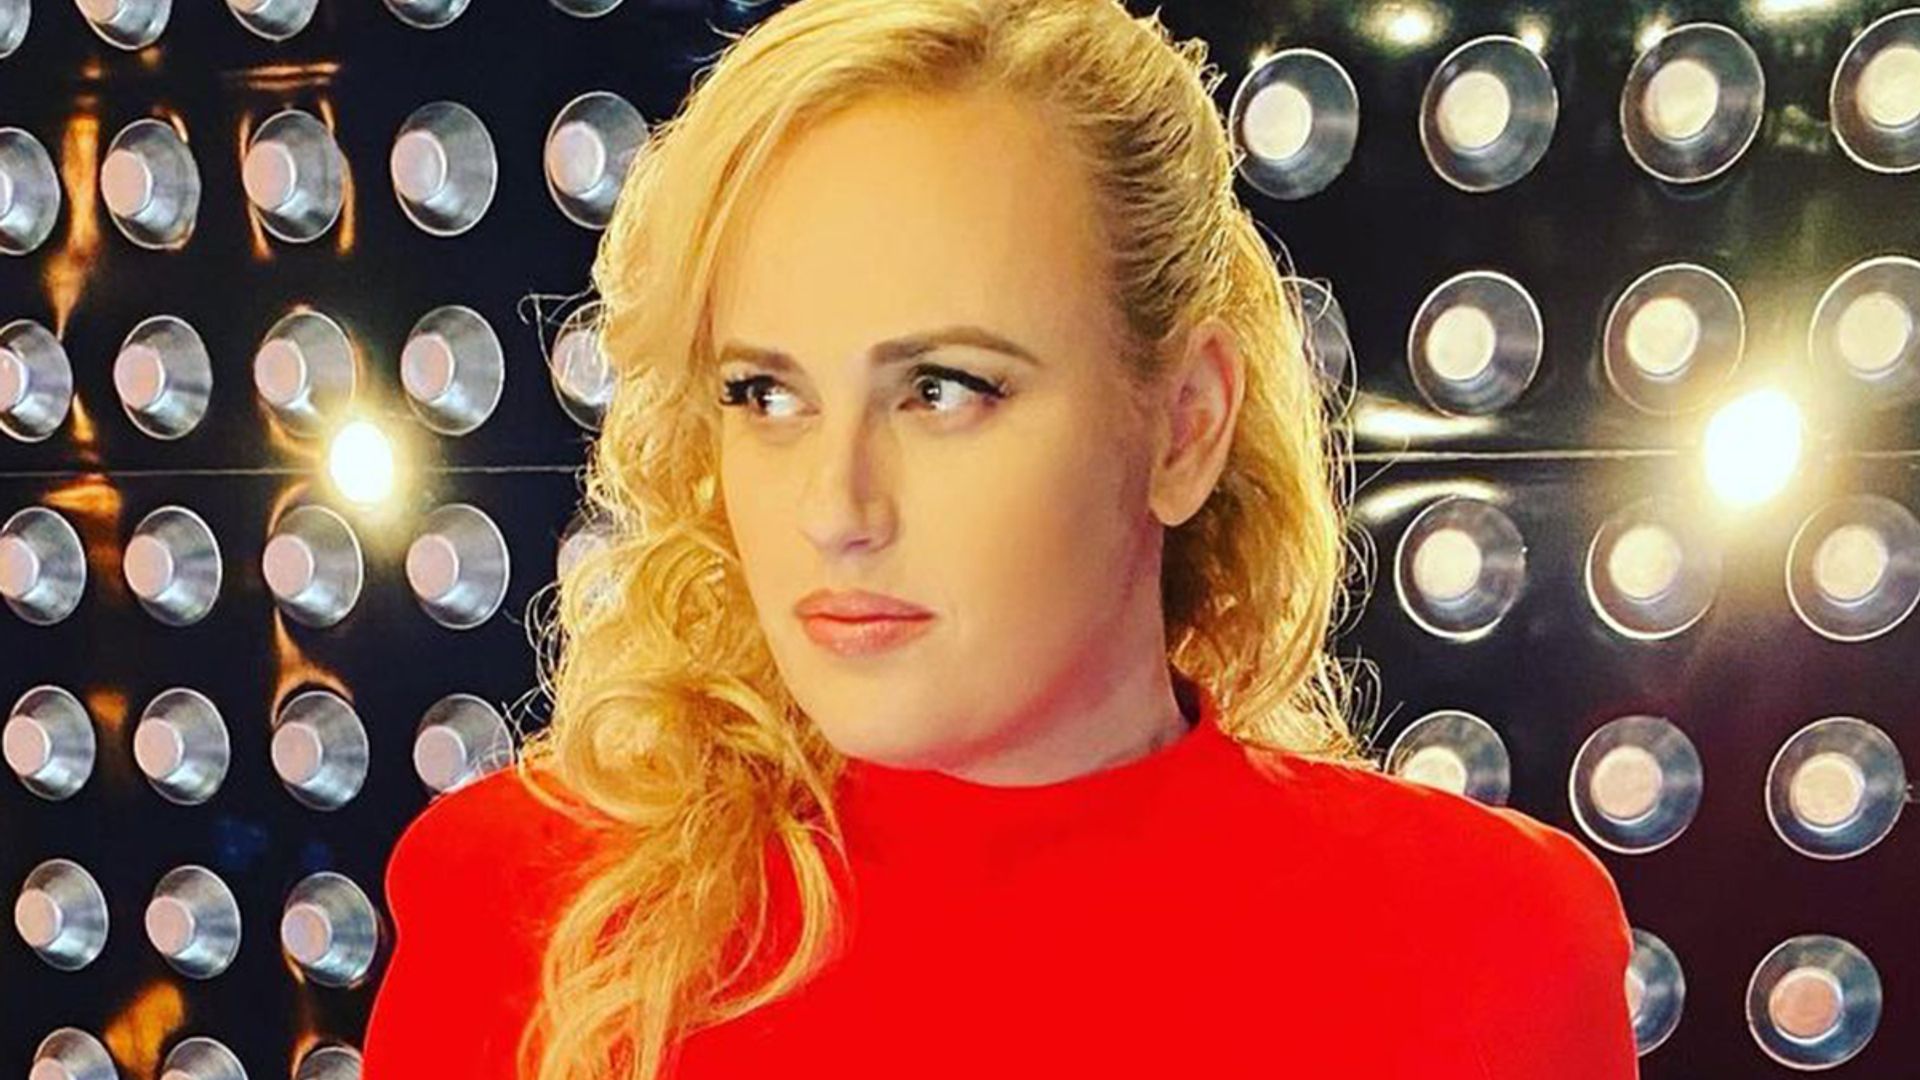 Rebel Wilson fans go wild for her latest figure-hugging gown - and Meghan Markle's worn it too!